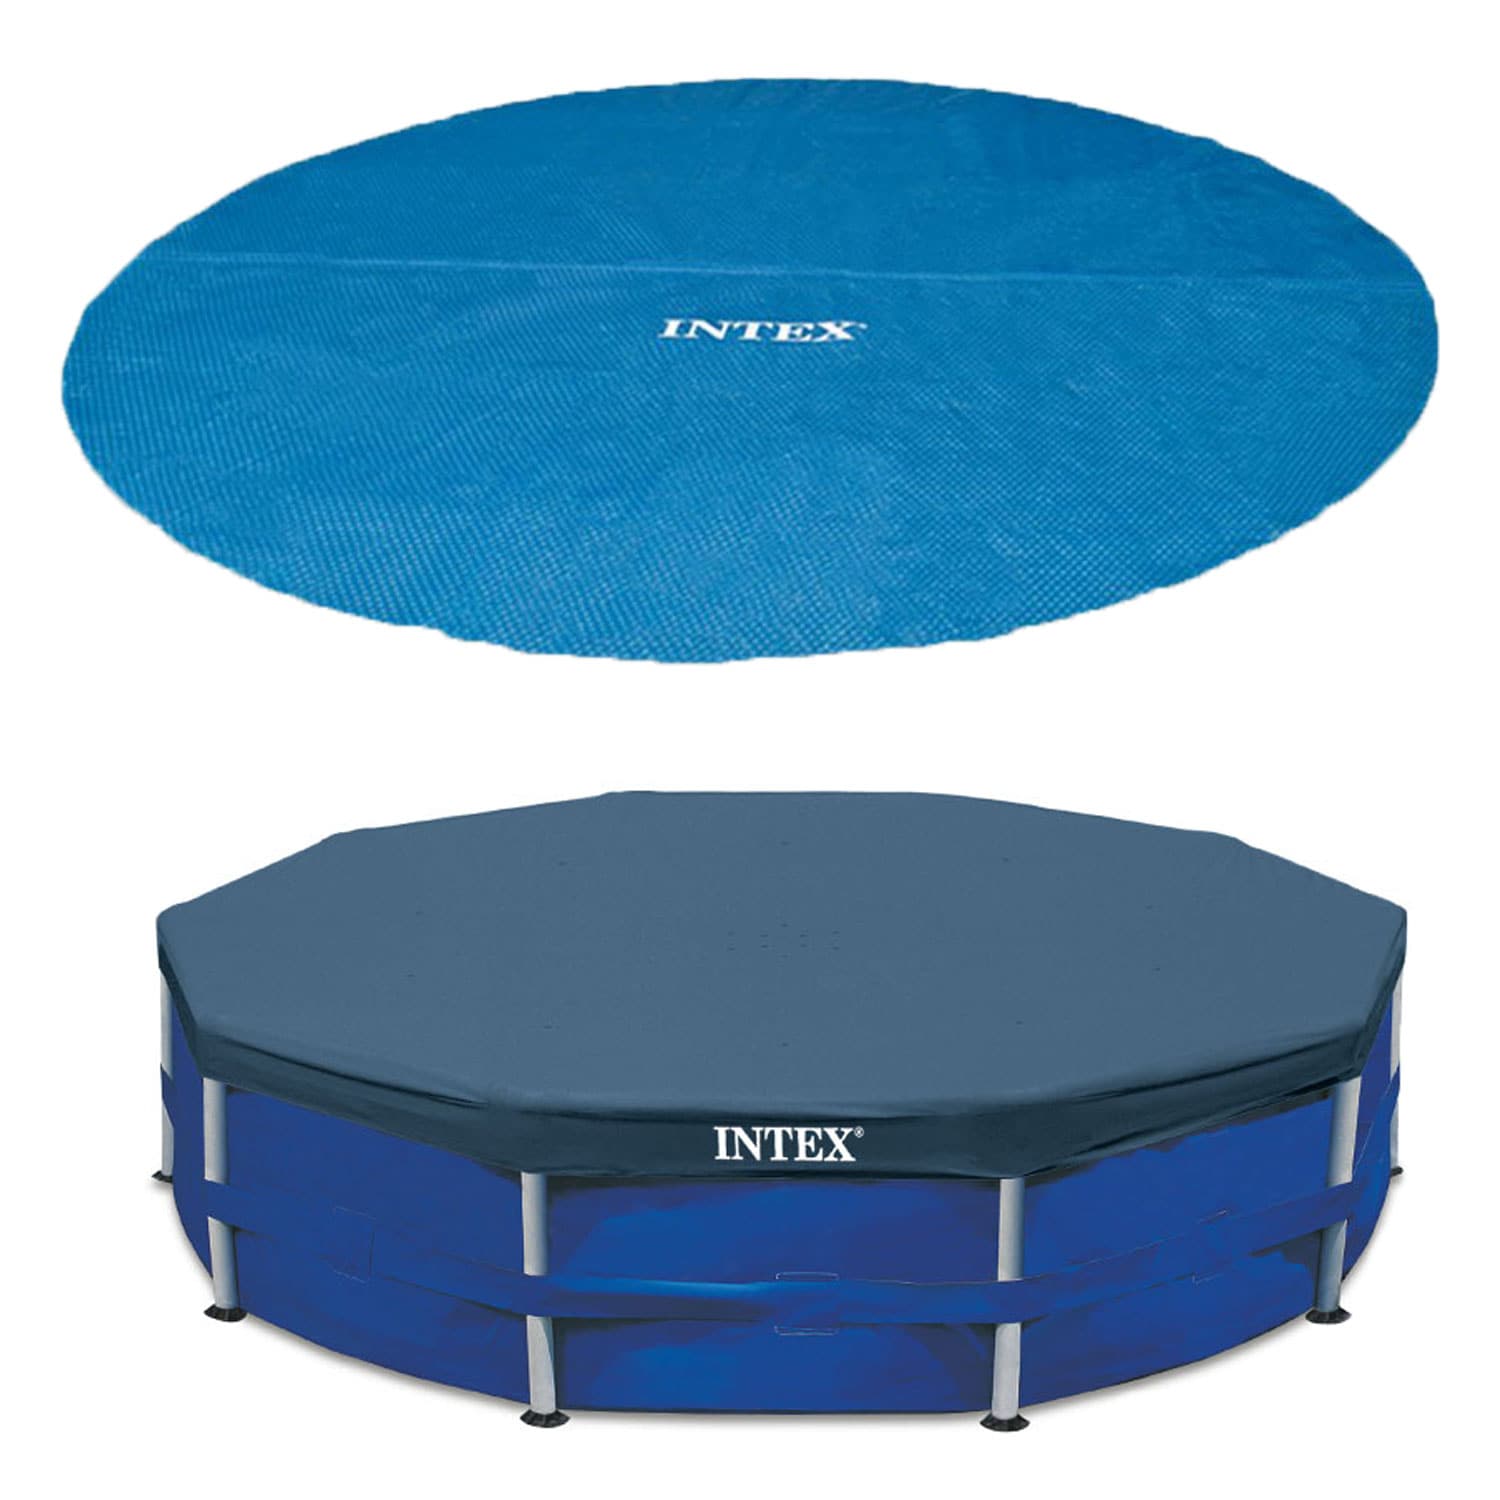 Intex - 15 Foot Round Debris Cover and Vinyl Solar Cover for Above Ground Pools